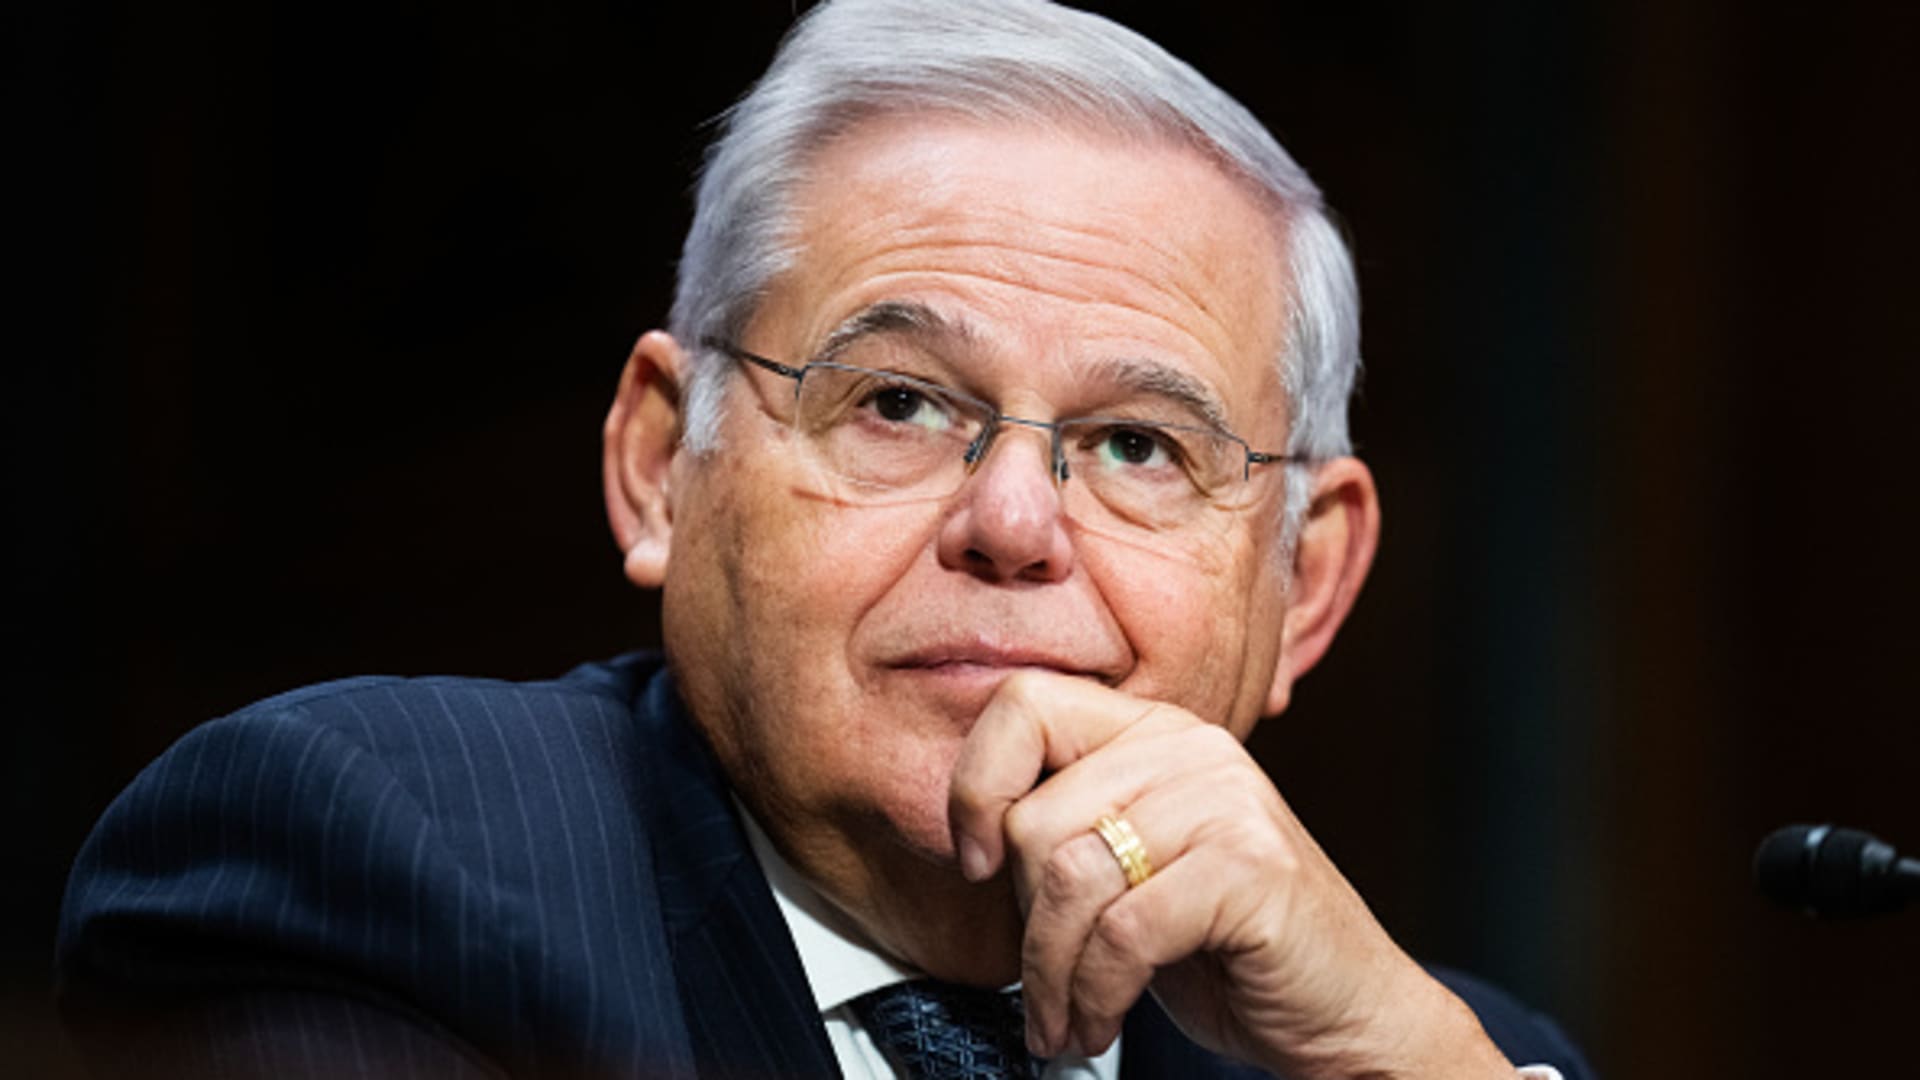 Sen. Bob Menendez, D-N.J., is seen after introducing Edward Sunyol Kiel, nominee to be U.S. District judge for the District of New Jersey, during a Senate Judiciary Committee hearing on judicial nominations in Dirksen Building on Wednesday, November 1, 2023.